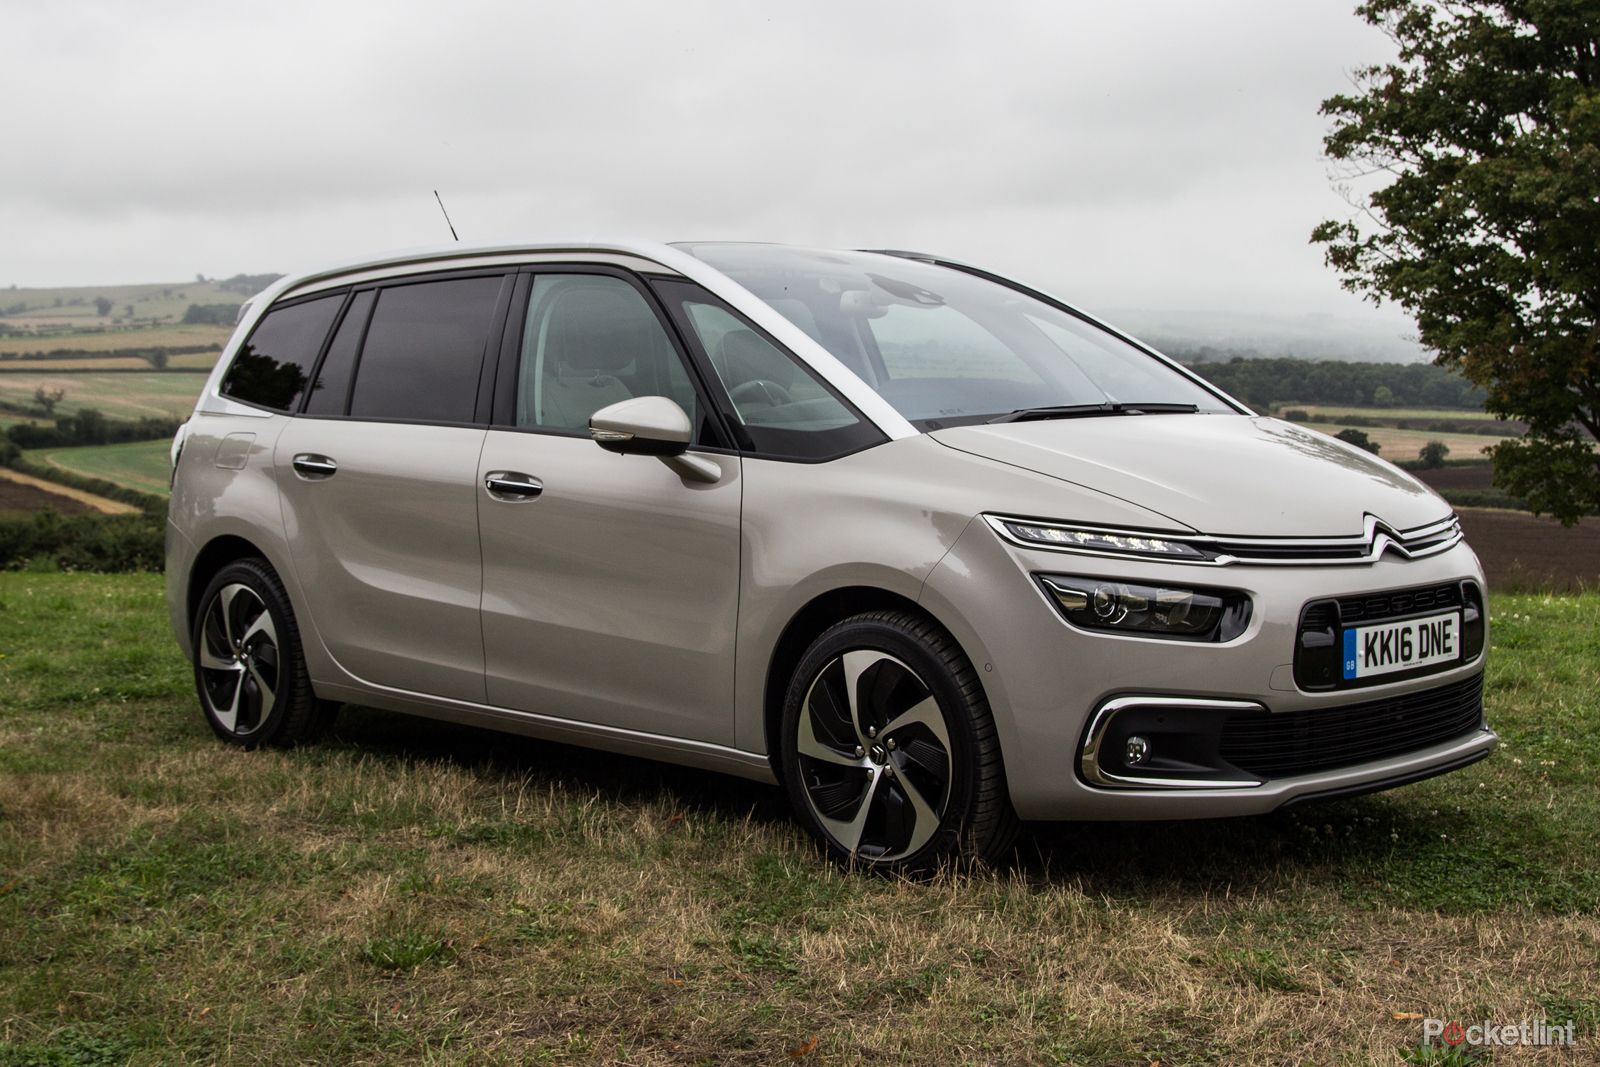 2018 Citroen Grand C4 Picasso quick spin review - Drive